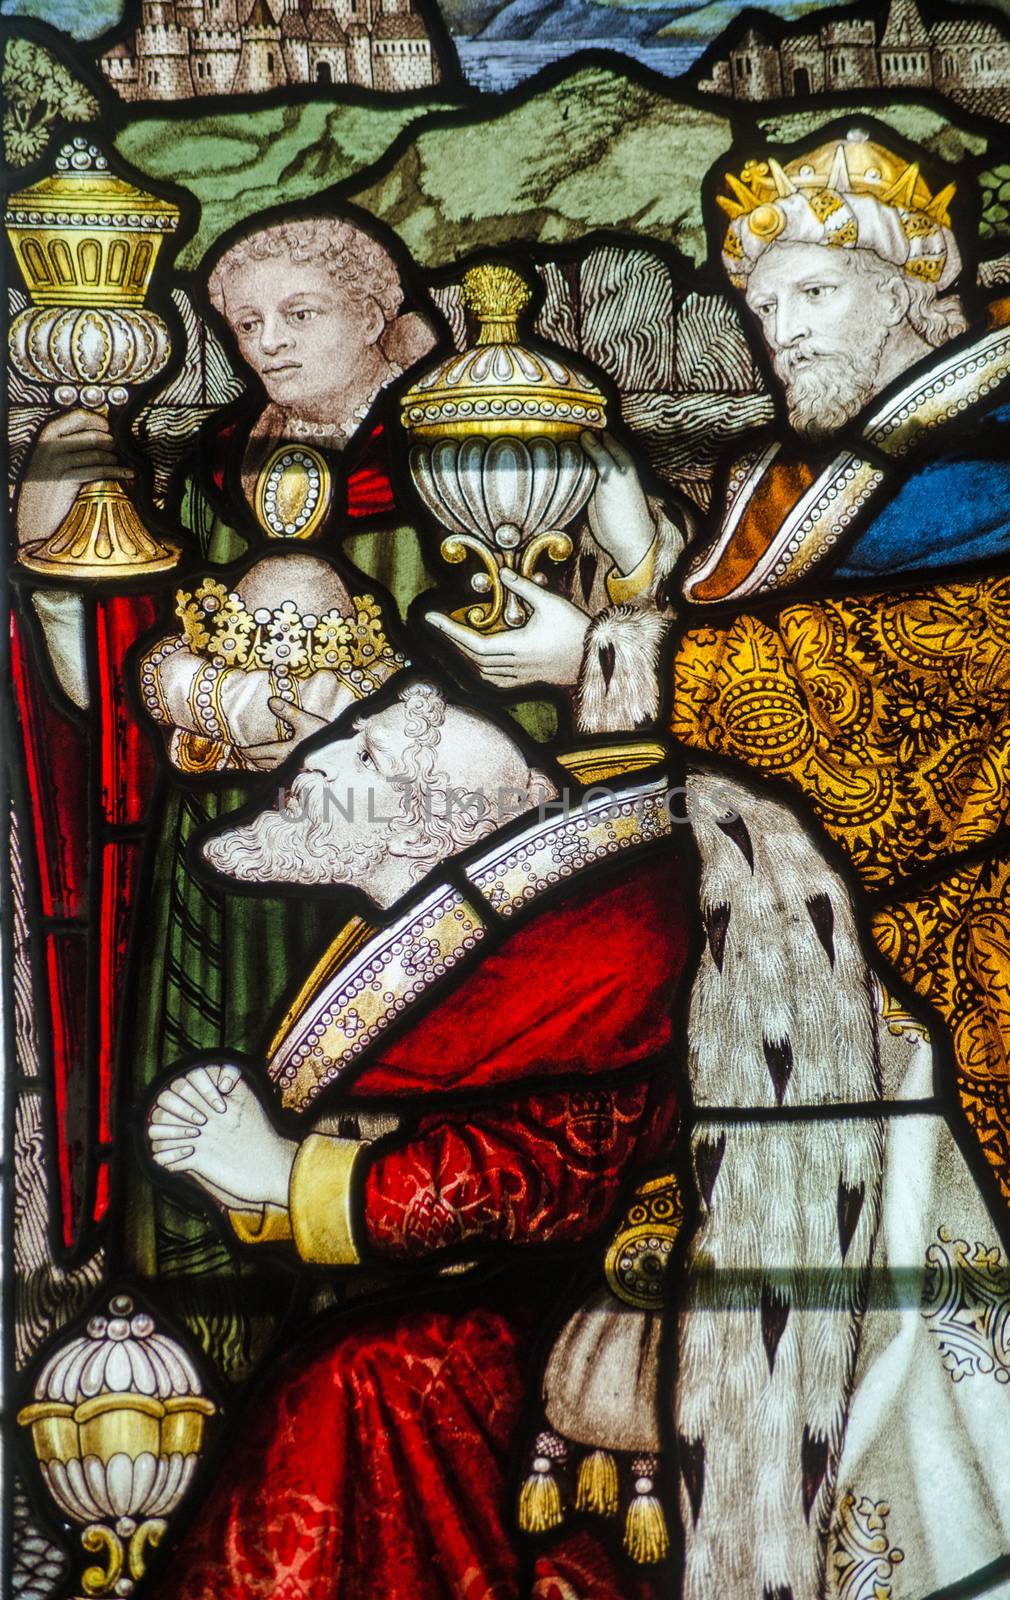 Victorian stained glass window showing the Three Kings presenting their gifts.  Historic window on public display over 100 years.  